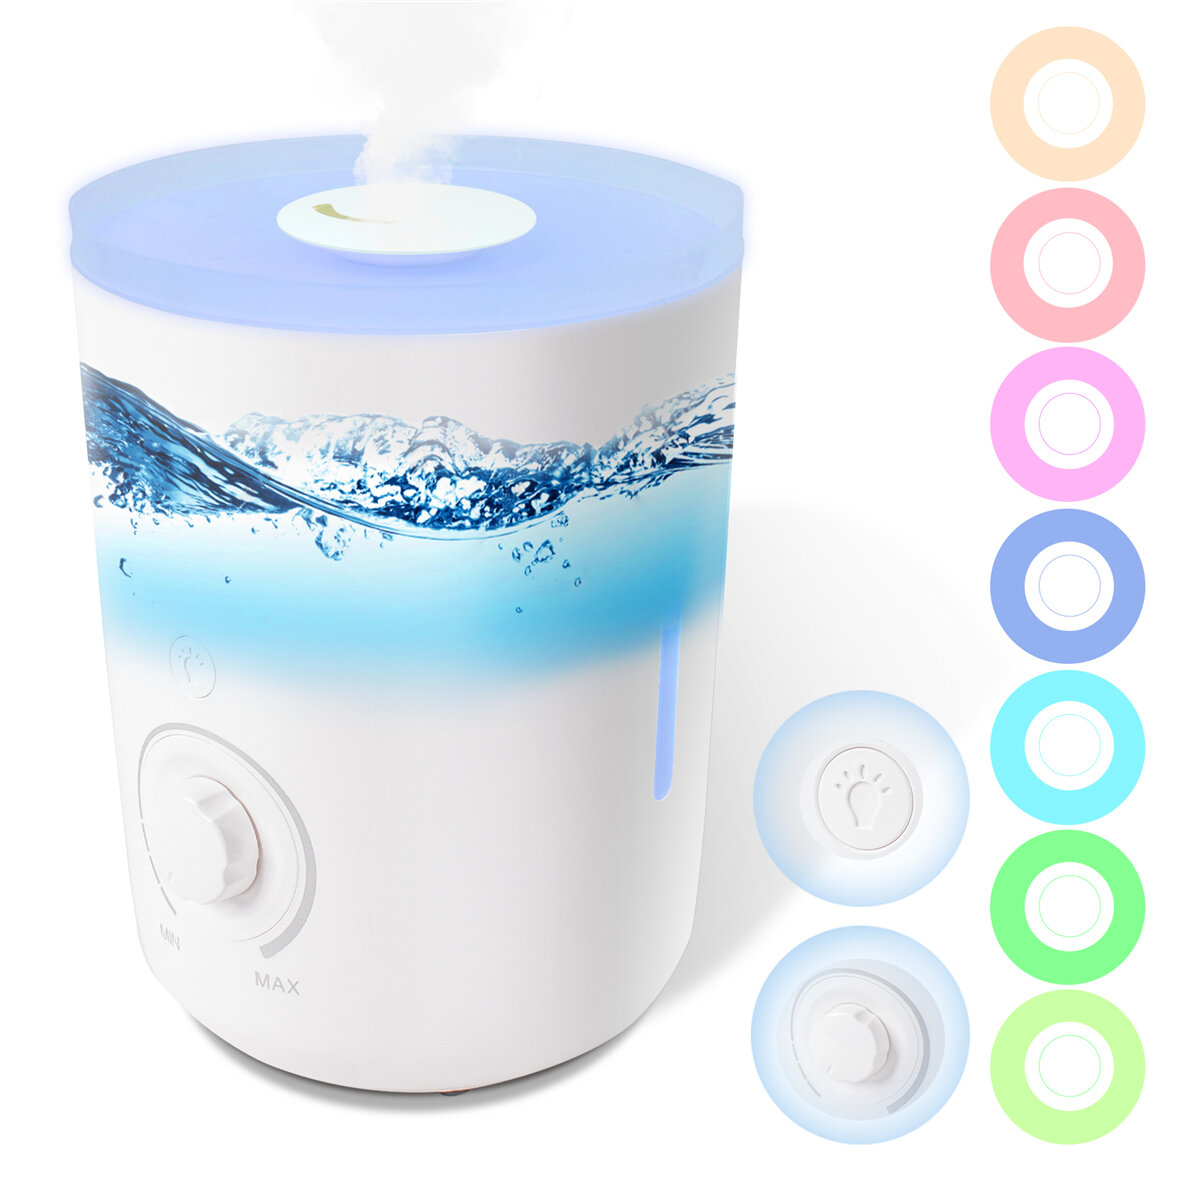 Image of Janolia 3L Air Humidifier 7 Colors LED Night Light Aroma Diffuser Air Purifier